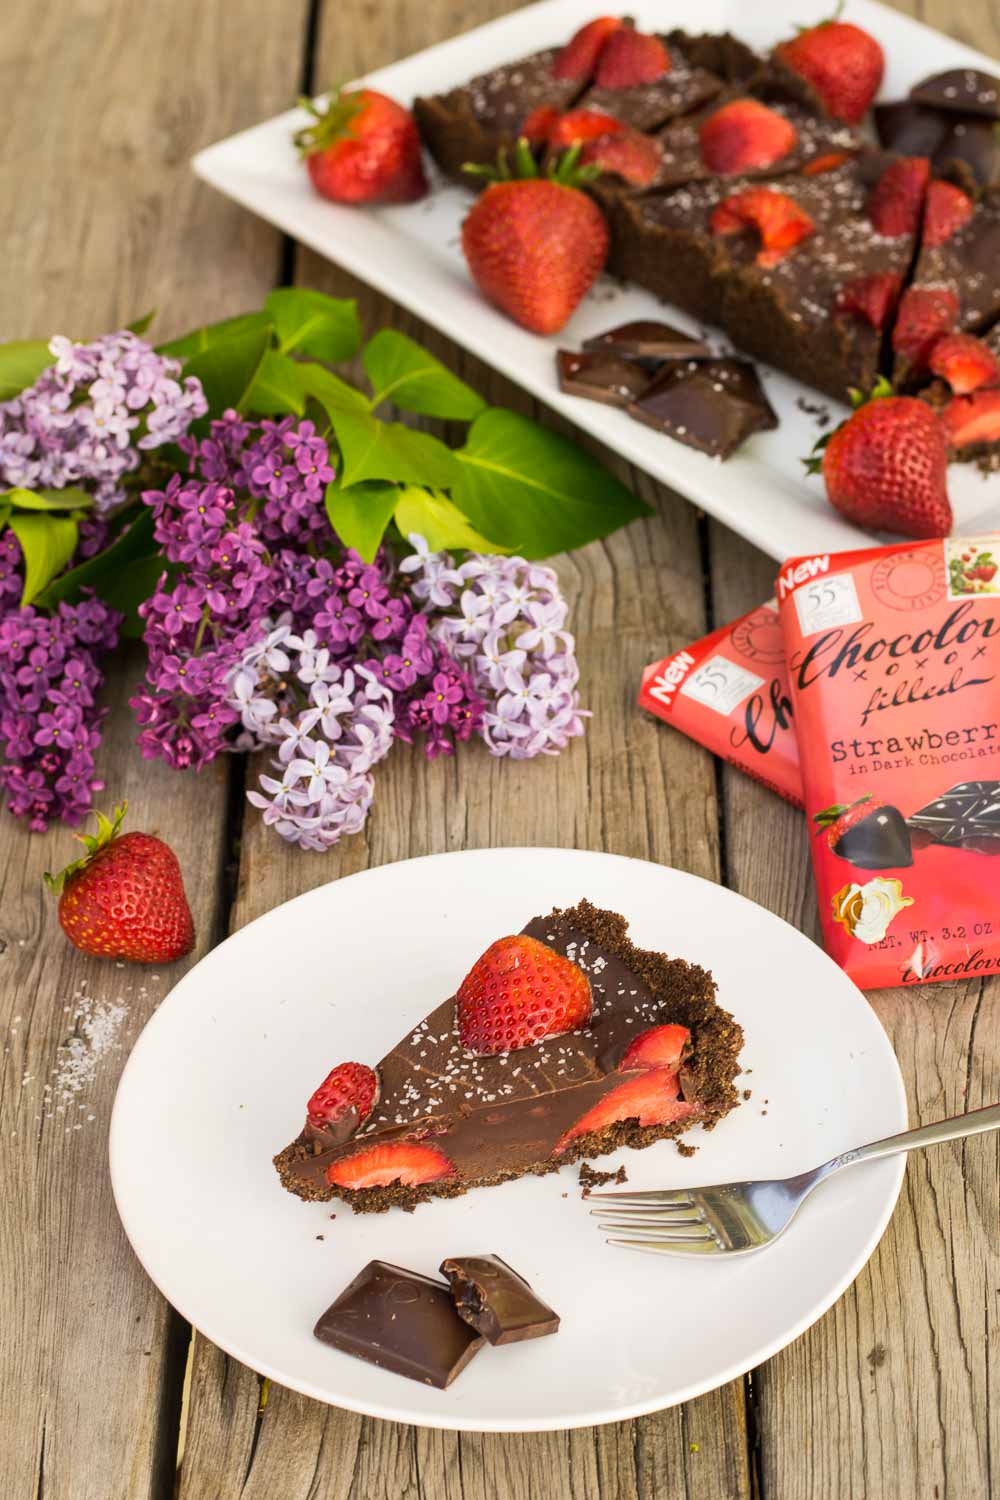 Six-ingredient, no-bake dark chocolate tart topped with strawberries & sea salt! A sweet act of love for the weekend, made the day before in just a few minutes.